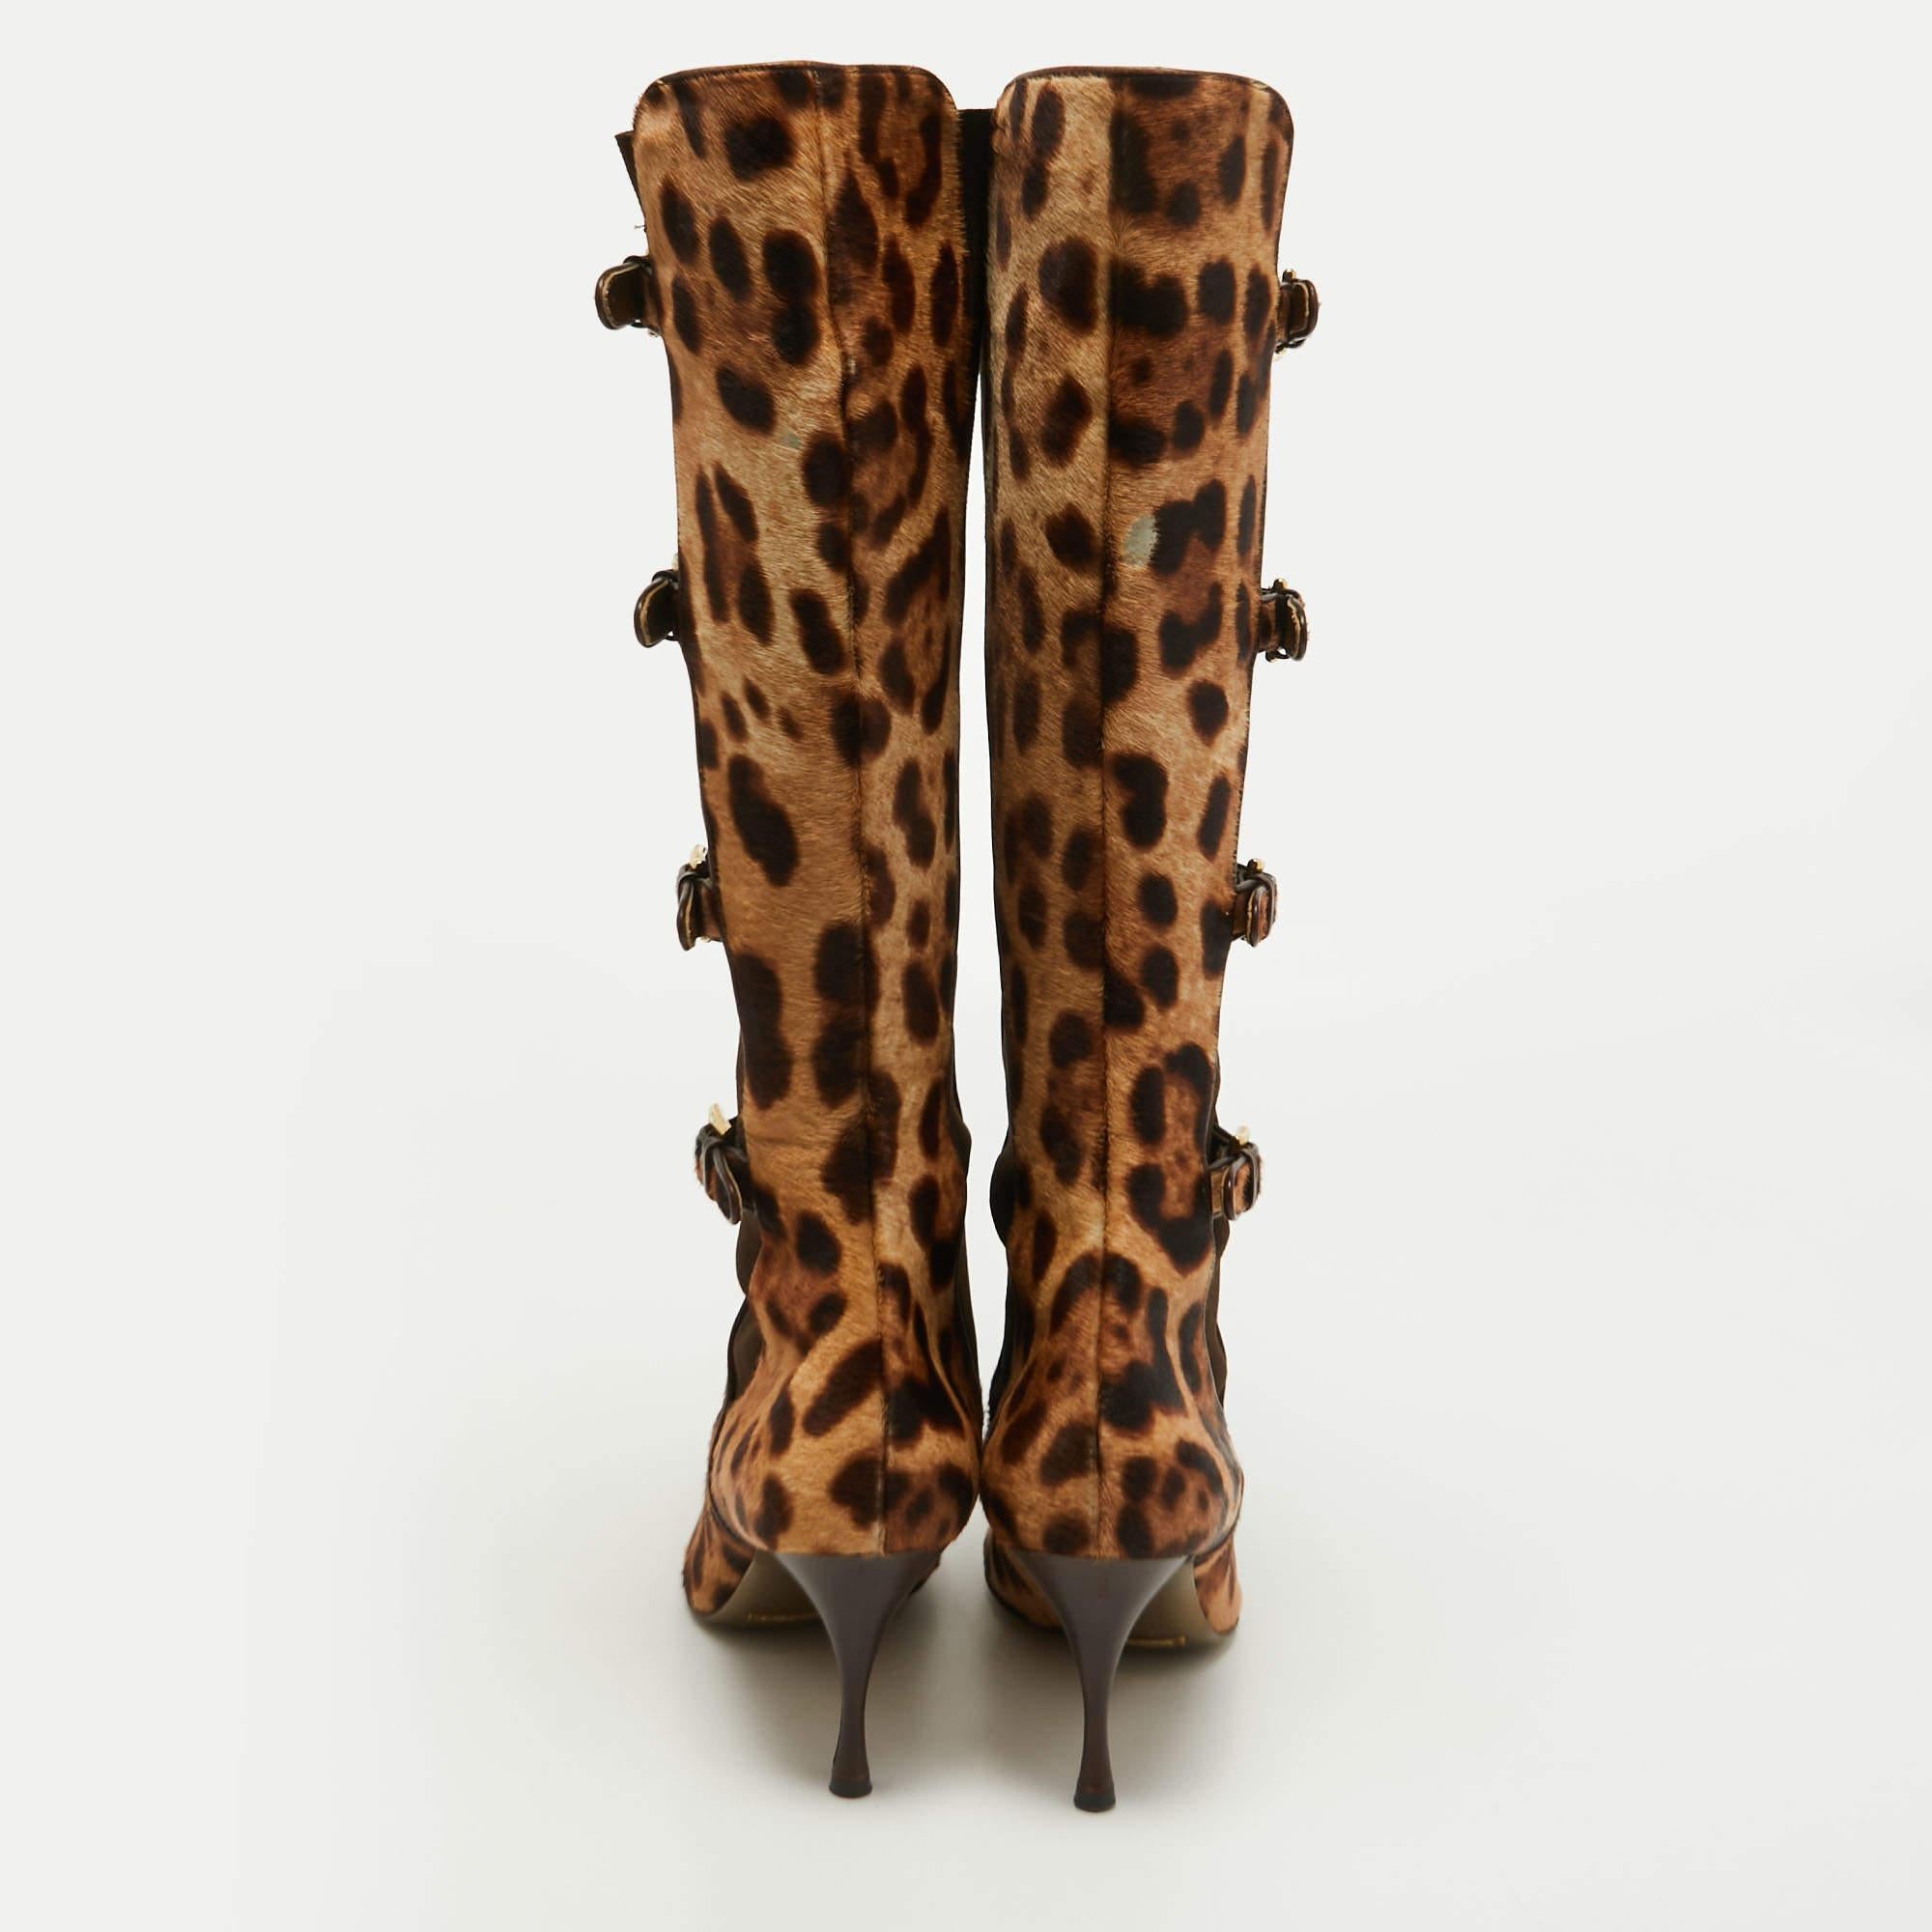 Give your outfit a chic update with this pair of Dolce & Gabbana knee-length boots. The leopard-print calf hair boots have covered toes, buckle details, and 9 cm heels. Make a statement in these!

